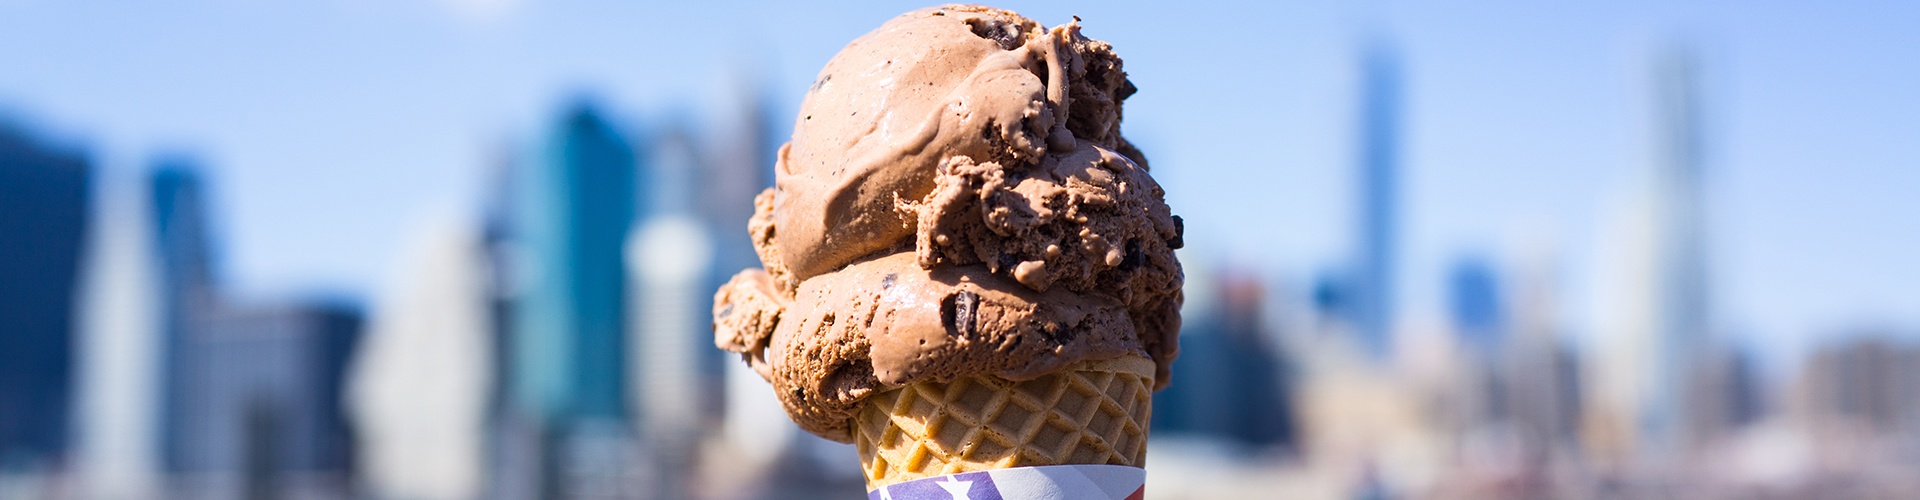 Best Ice Cream Spots in NYC